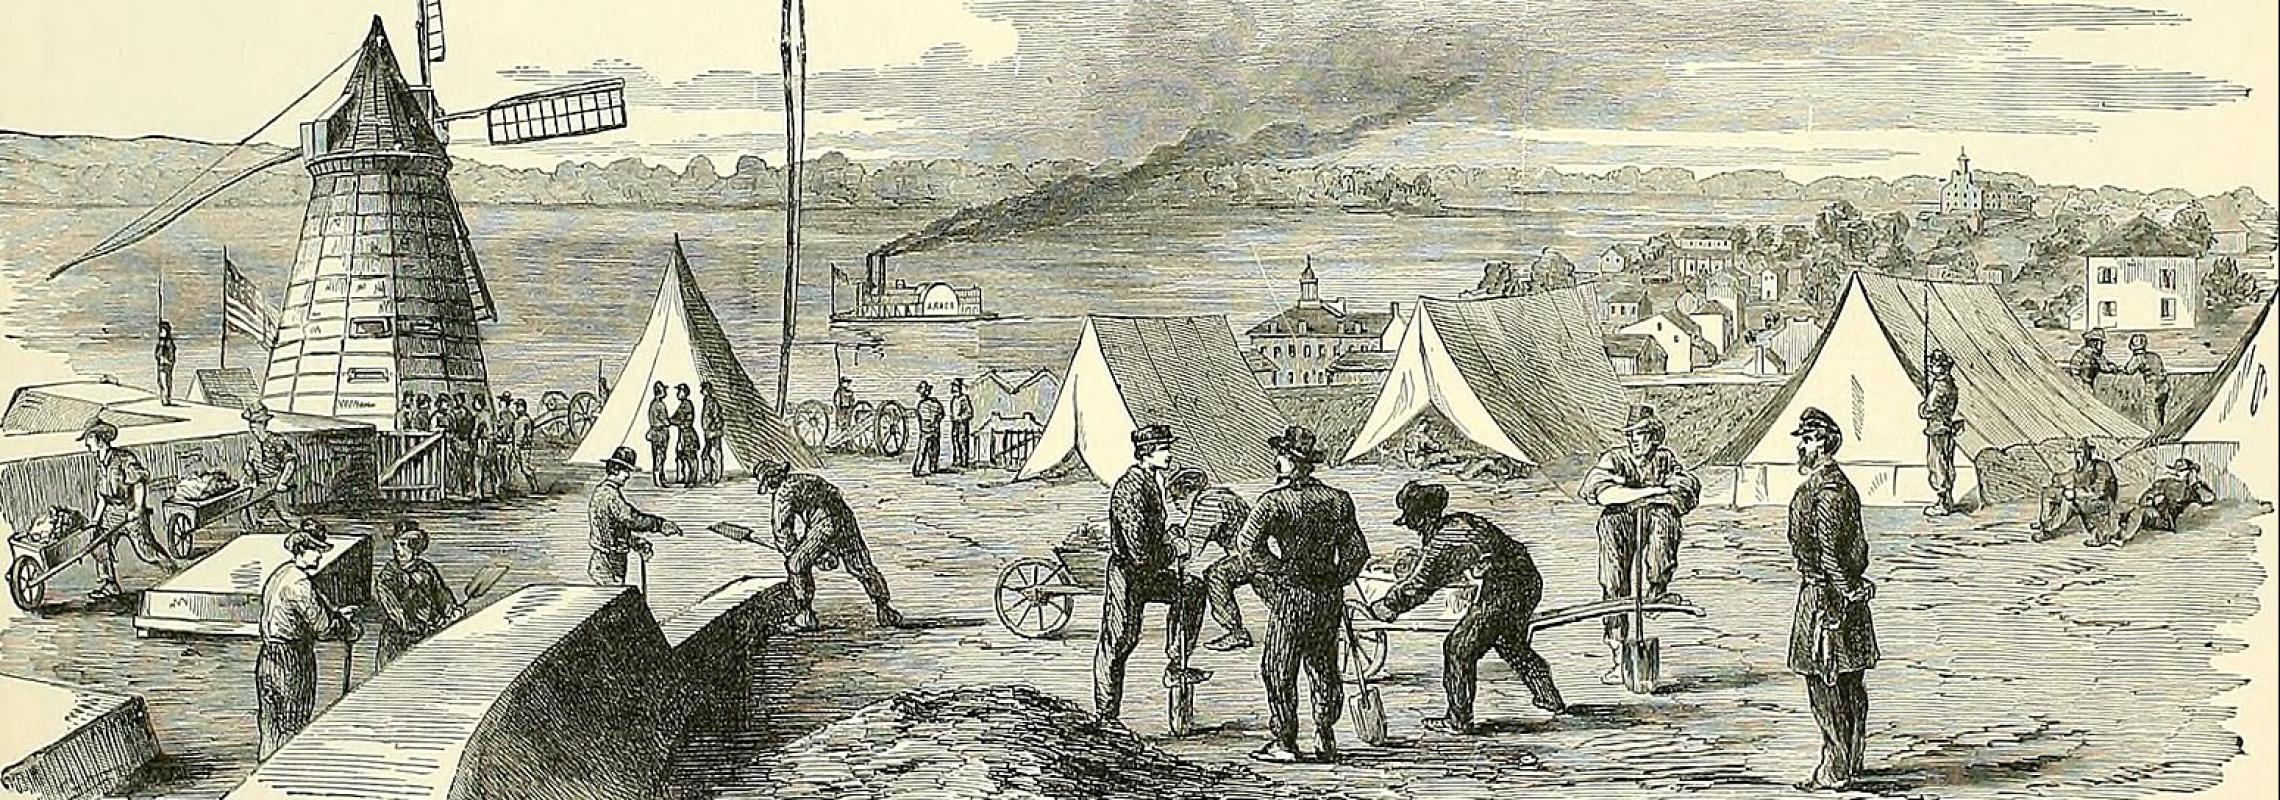 Cape Girardeau occupied by federal troops, April 26, 1863, "The Soldier in our Civil War Pictorial History of the Conflict, 1861-1865; sketch by Forbes, Waud, Taylor.